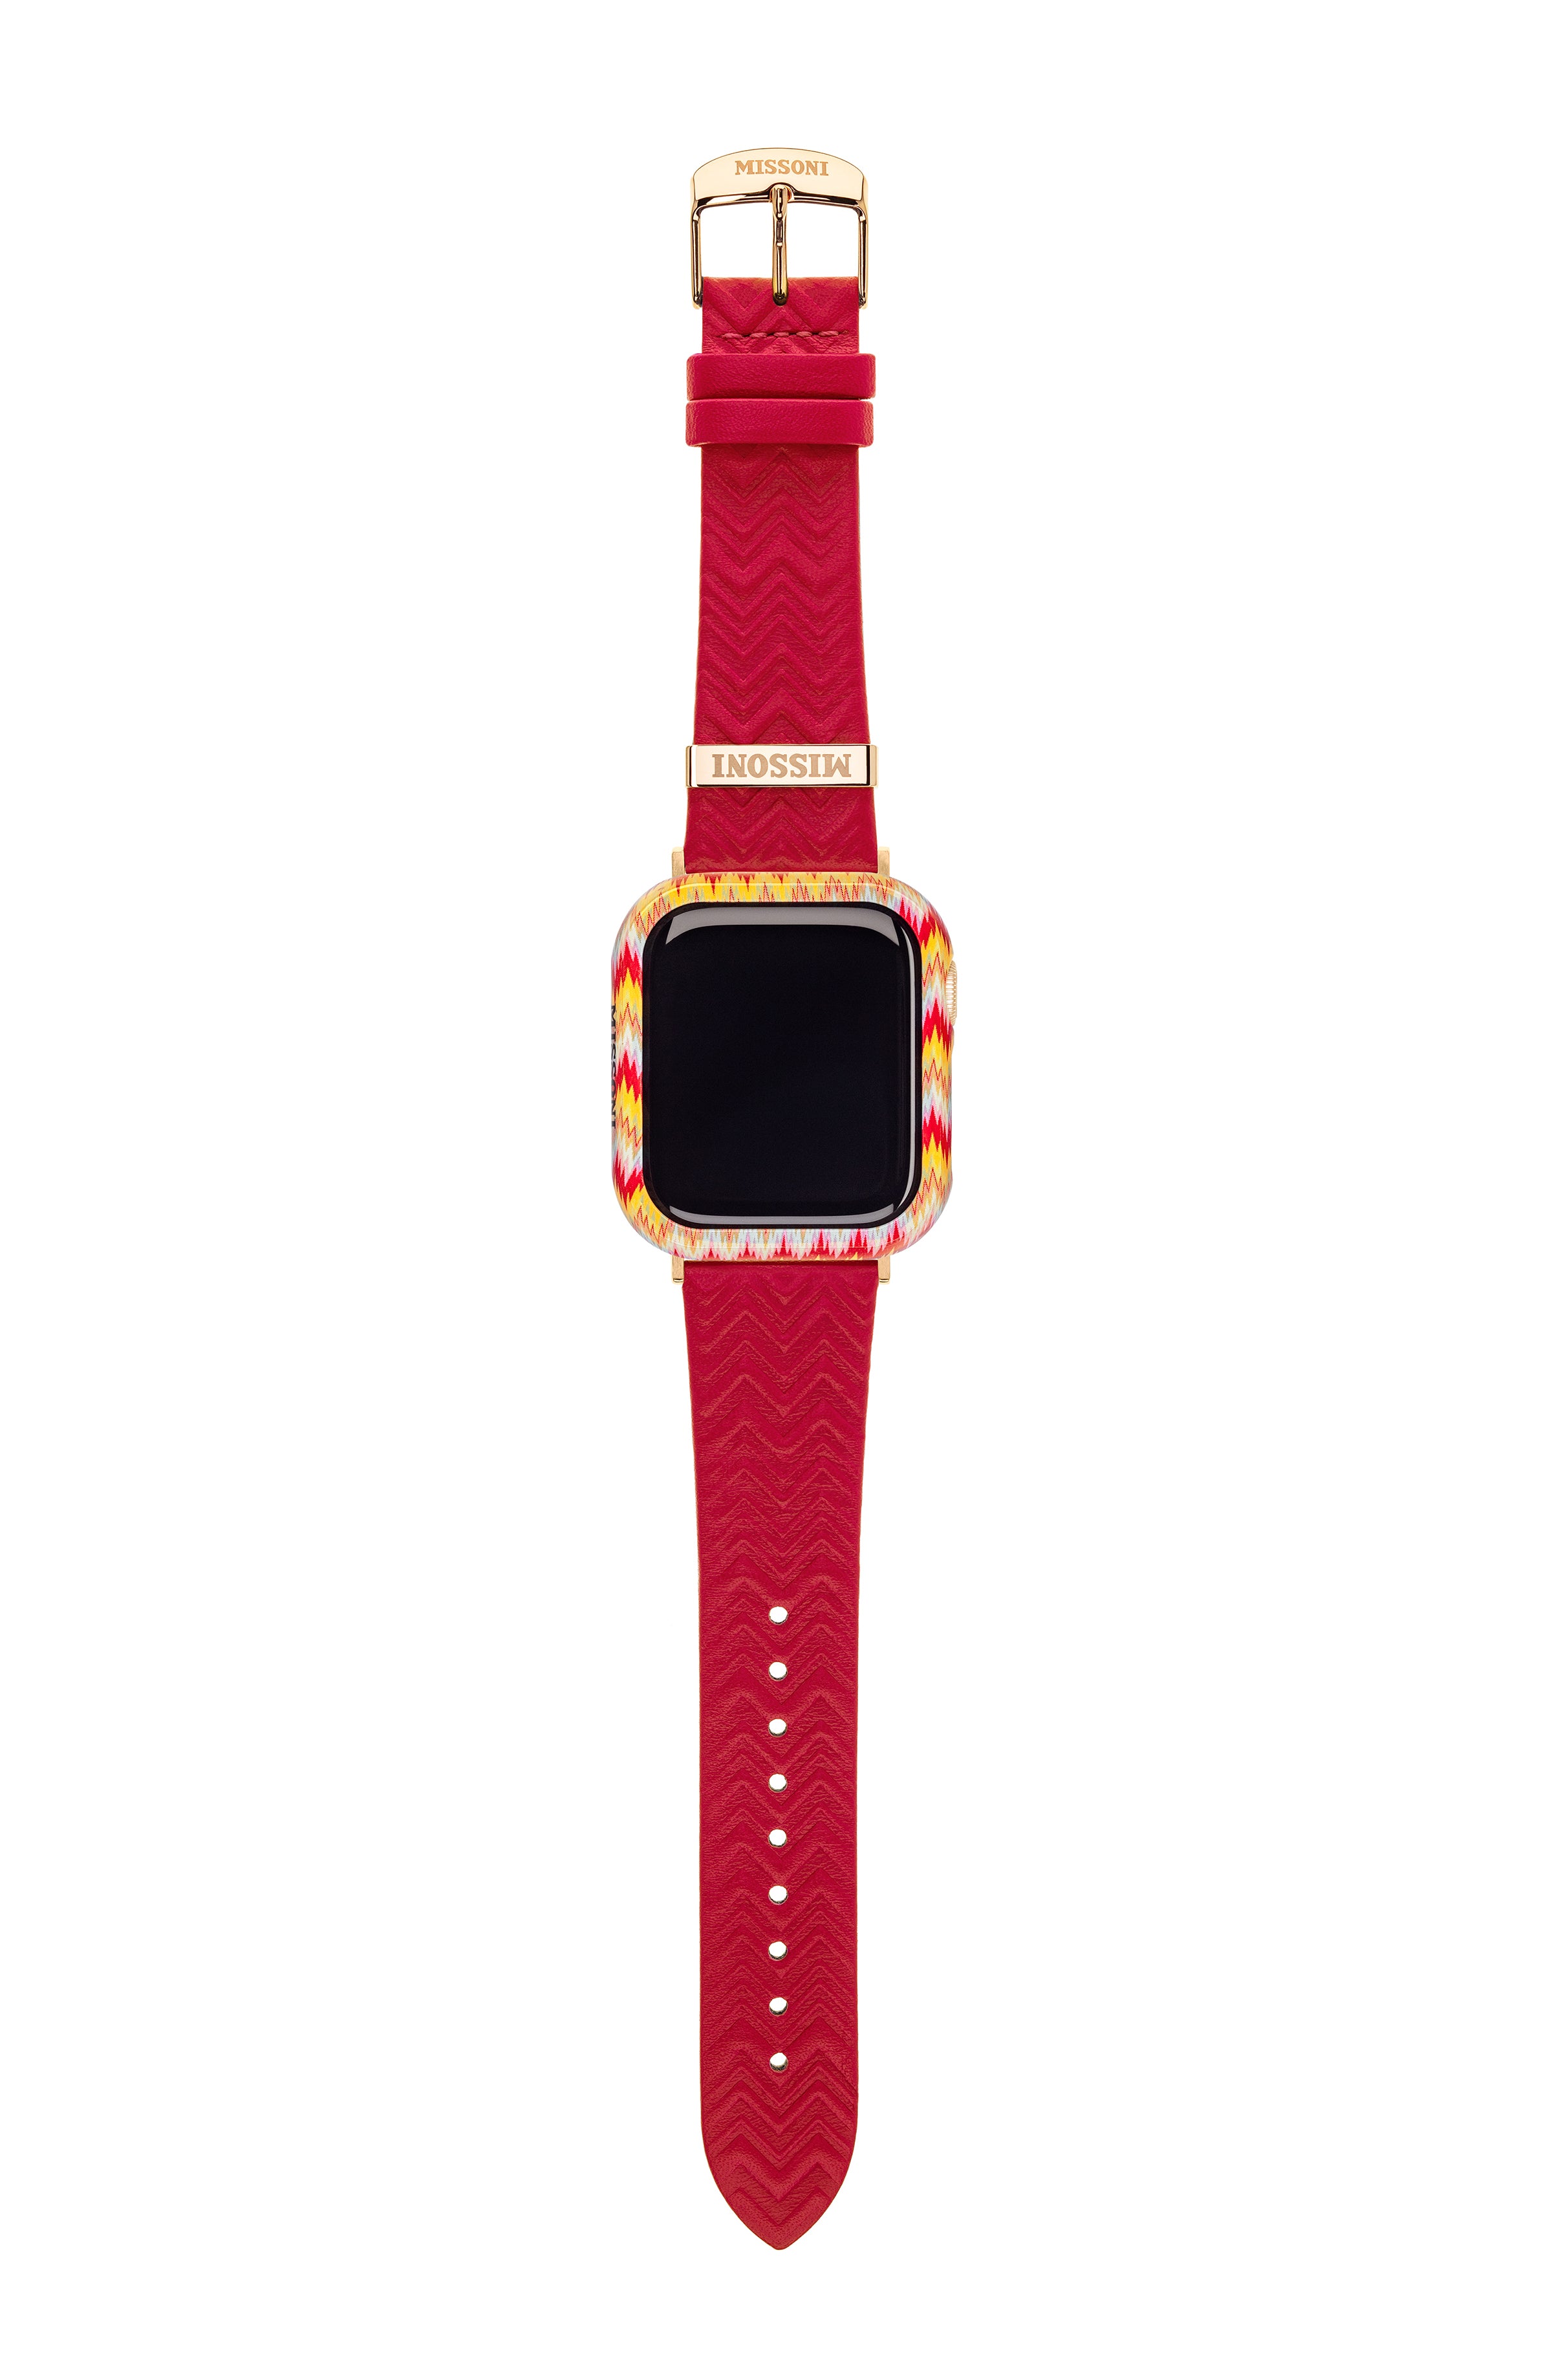 Missoni Apple Watch® Cover and Band Gift Set